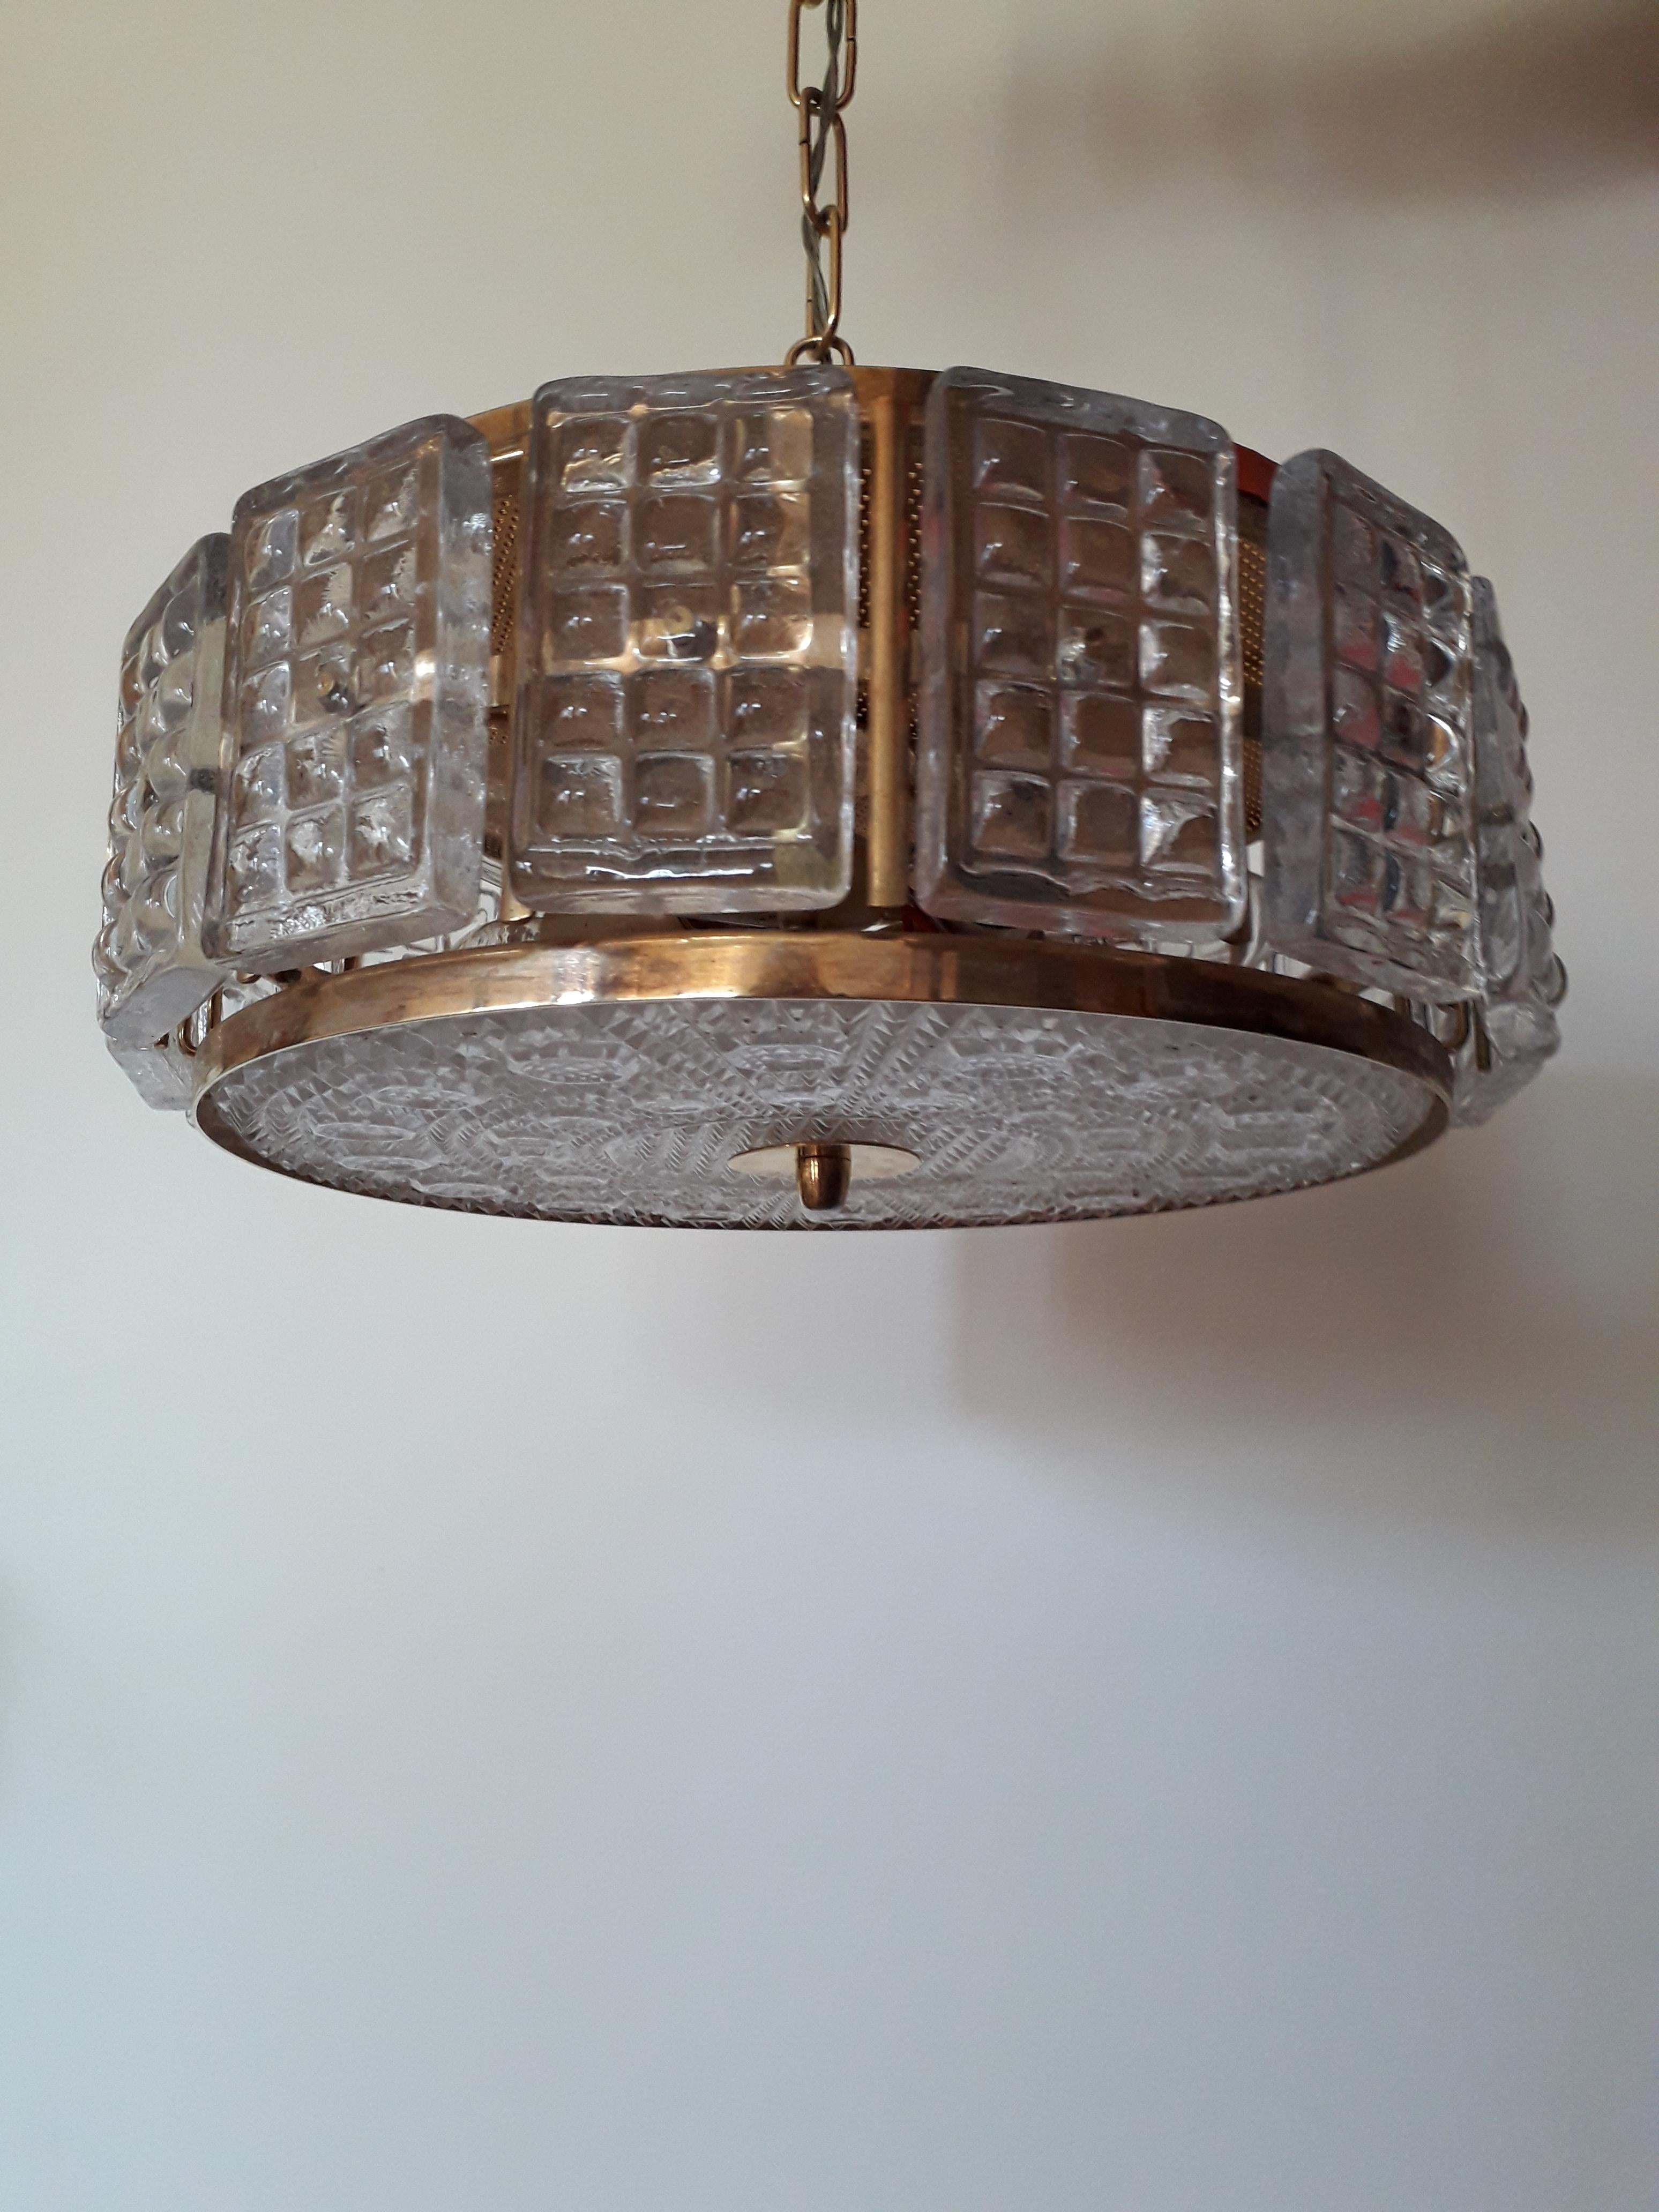 Mid-Century Modern Glass and Brass Chandelier By Carl Fangerlund For Orrefors 1970s For Sale